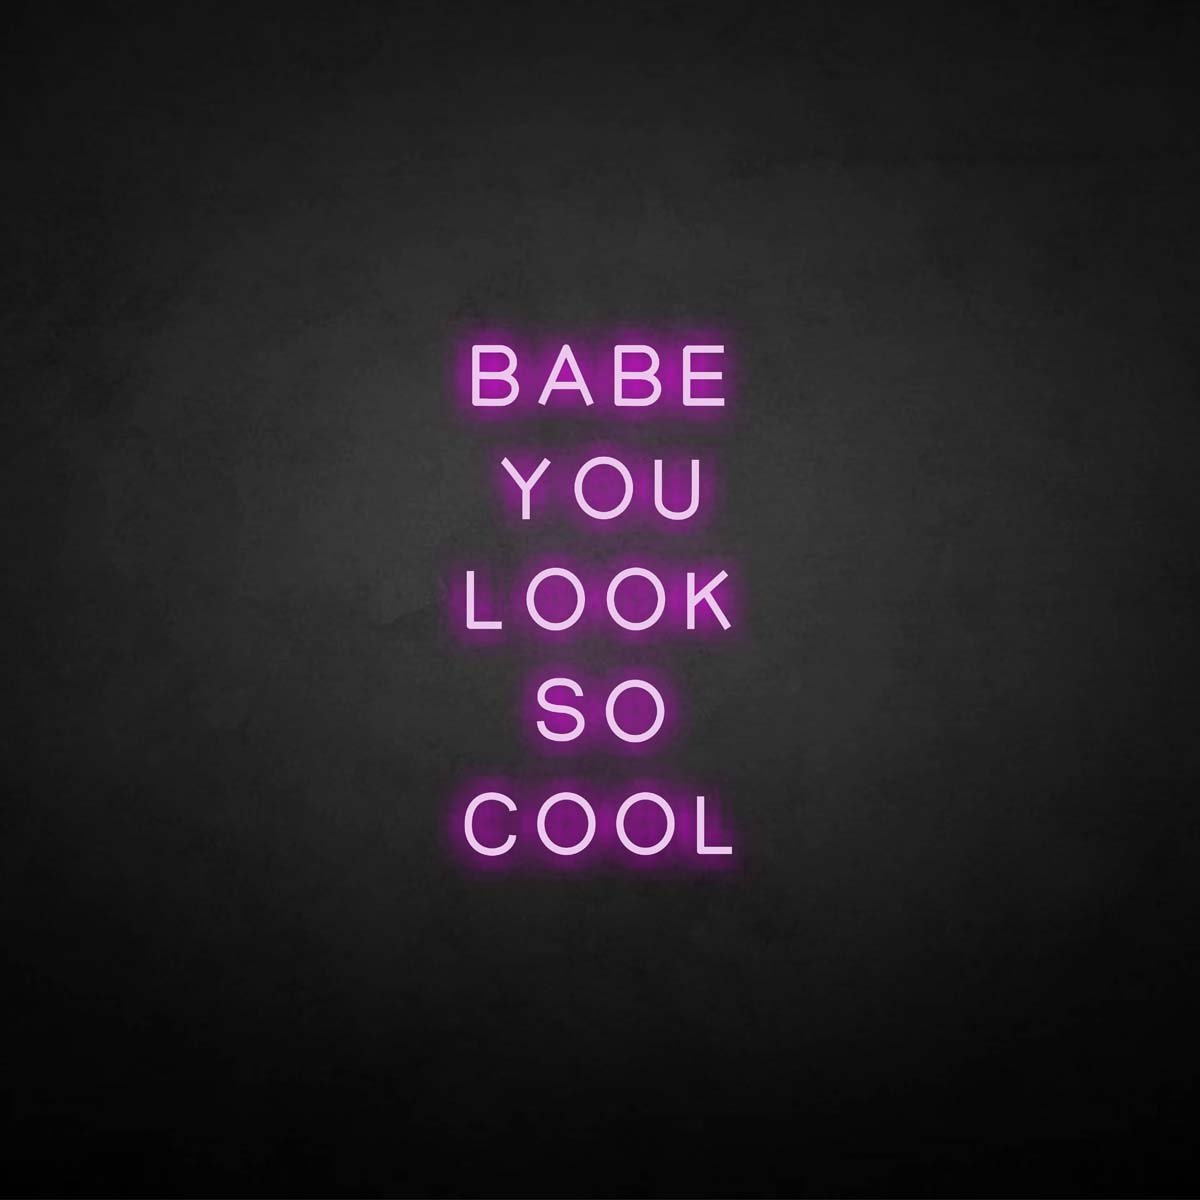 Babe You Look So Cool neon sign